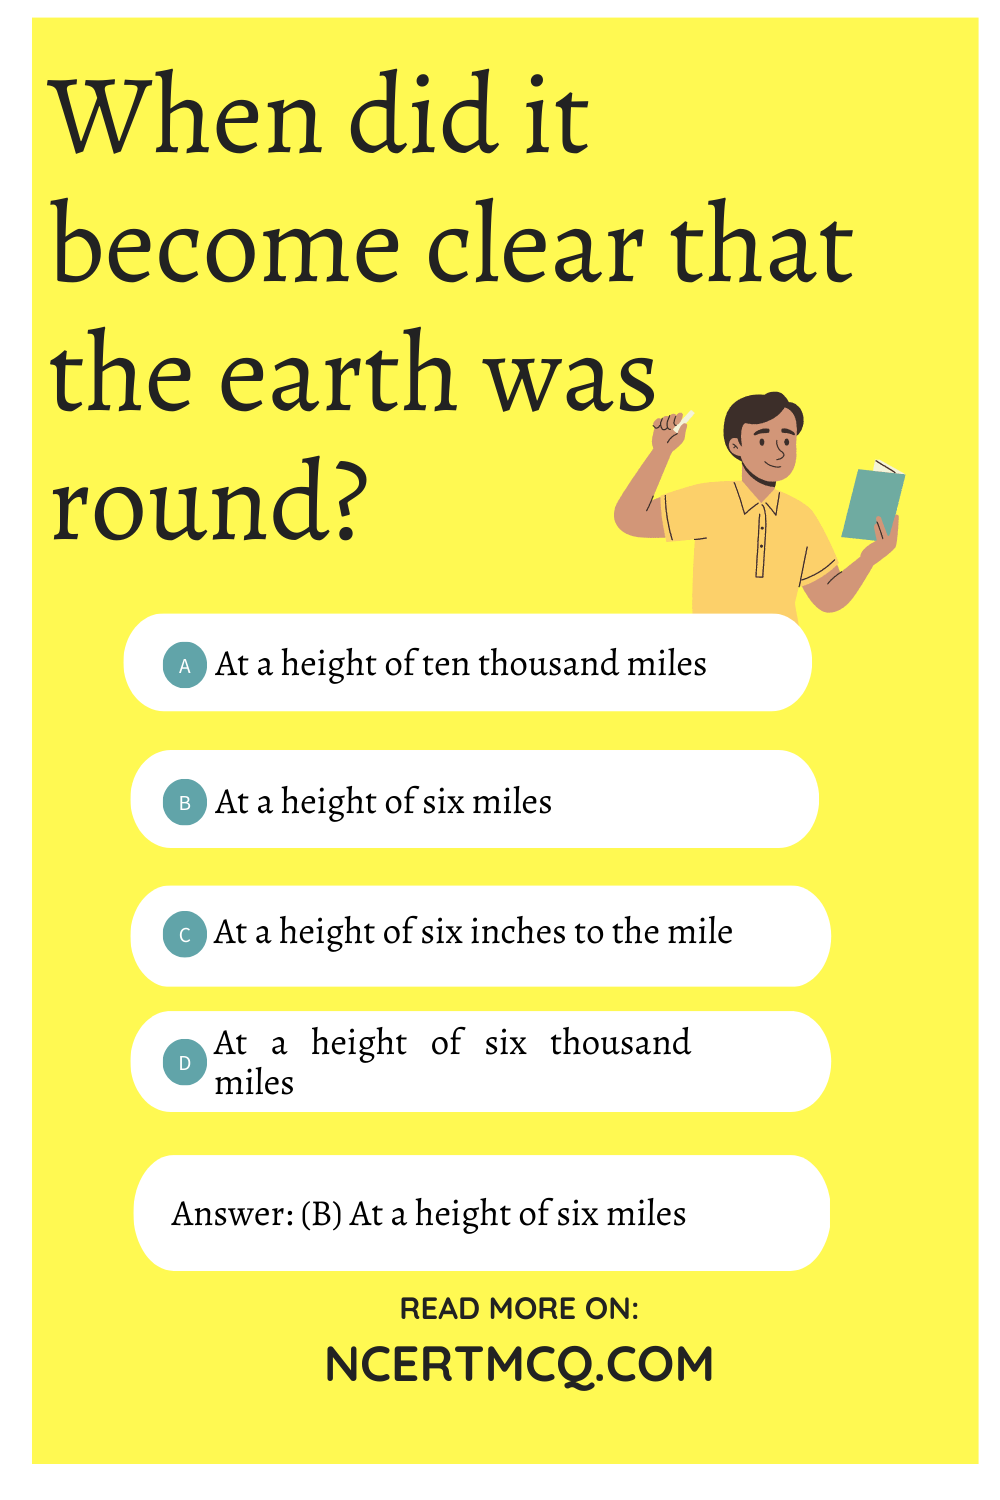 When did it become clear that the earth was round?